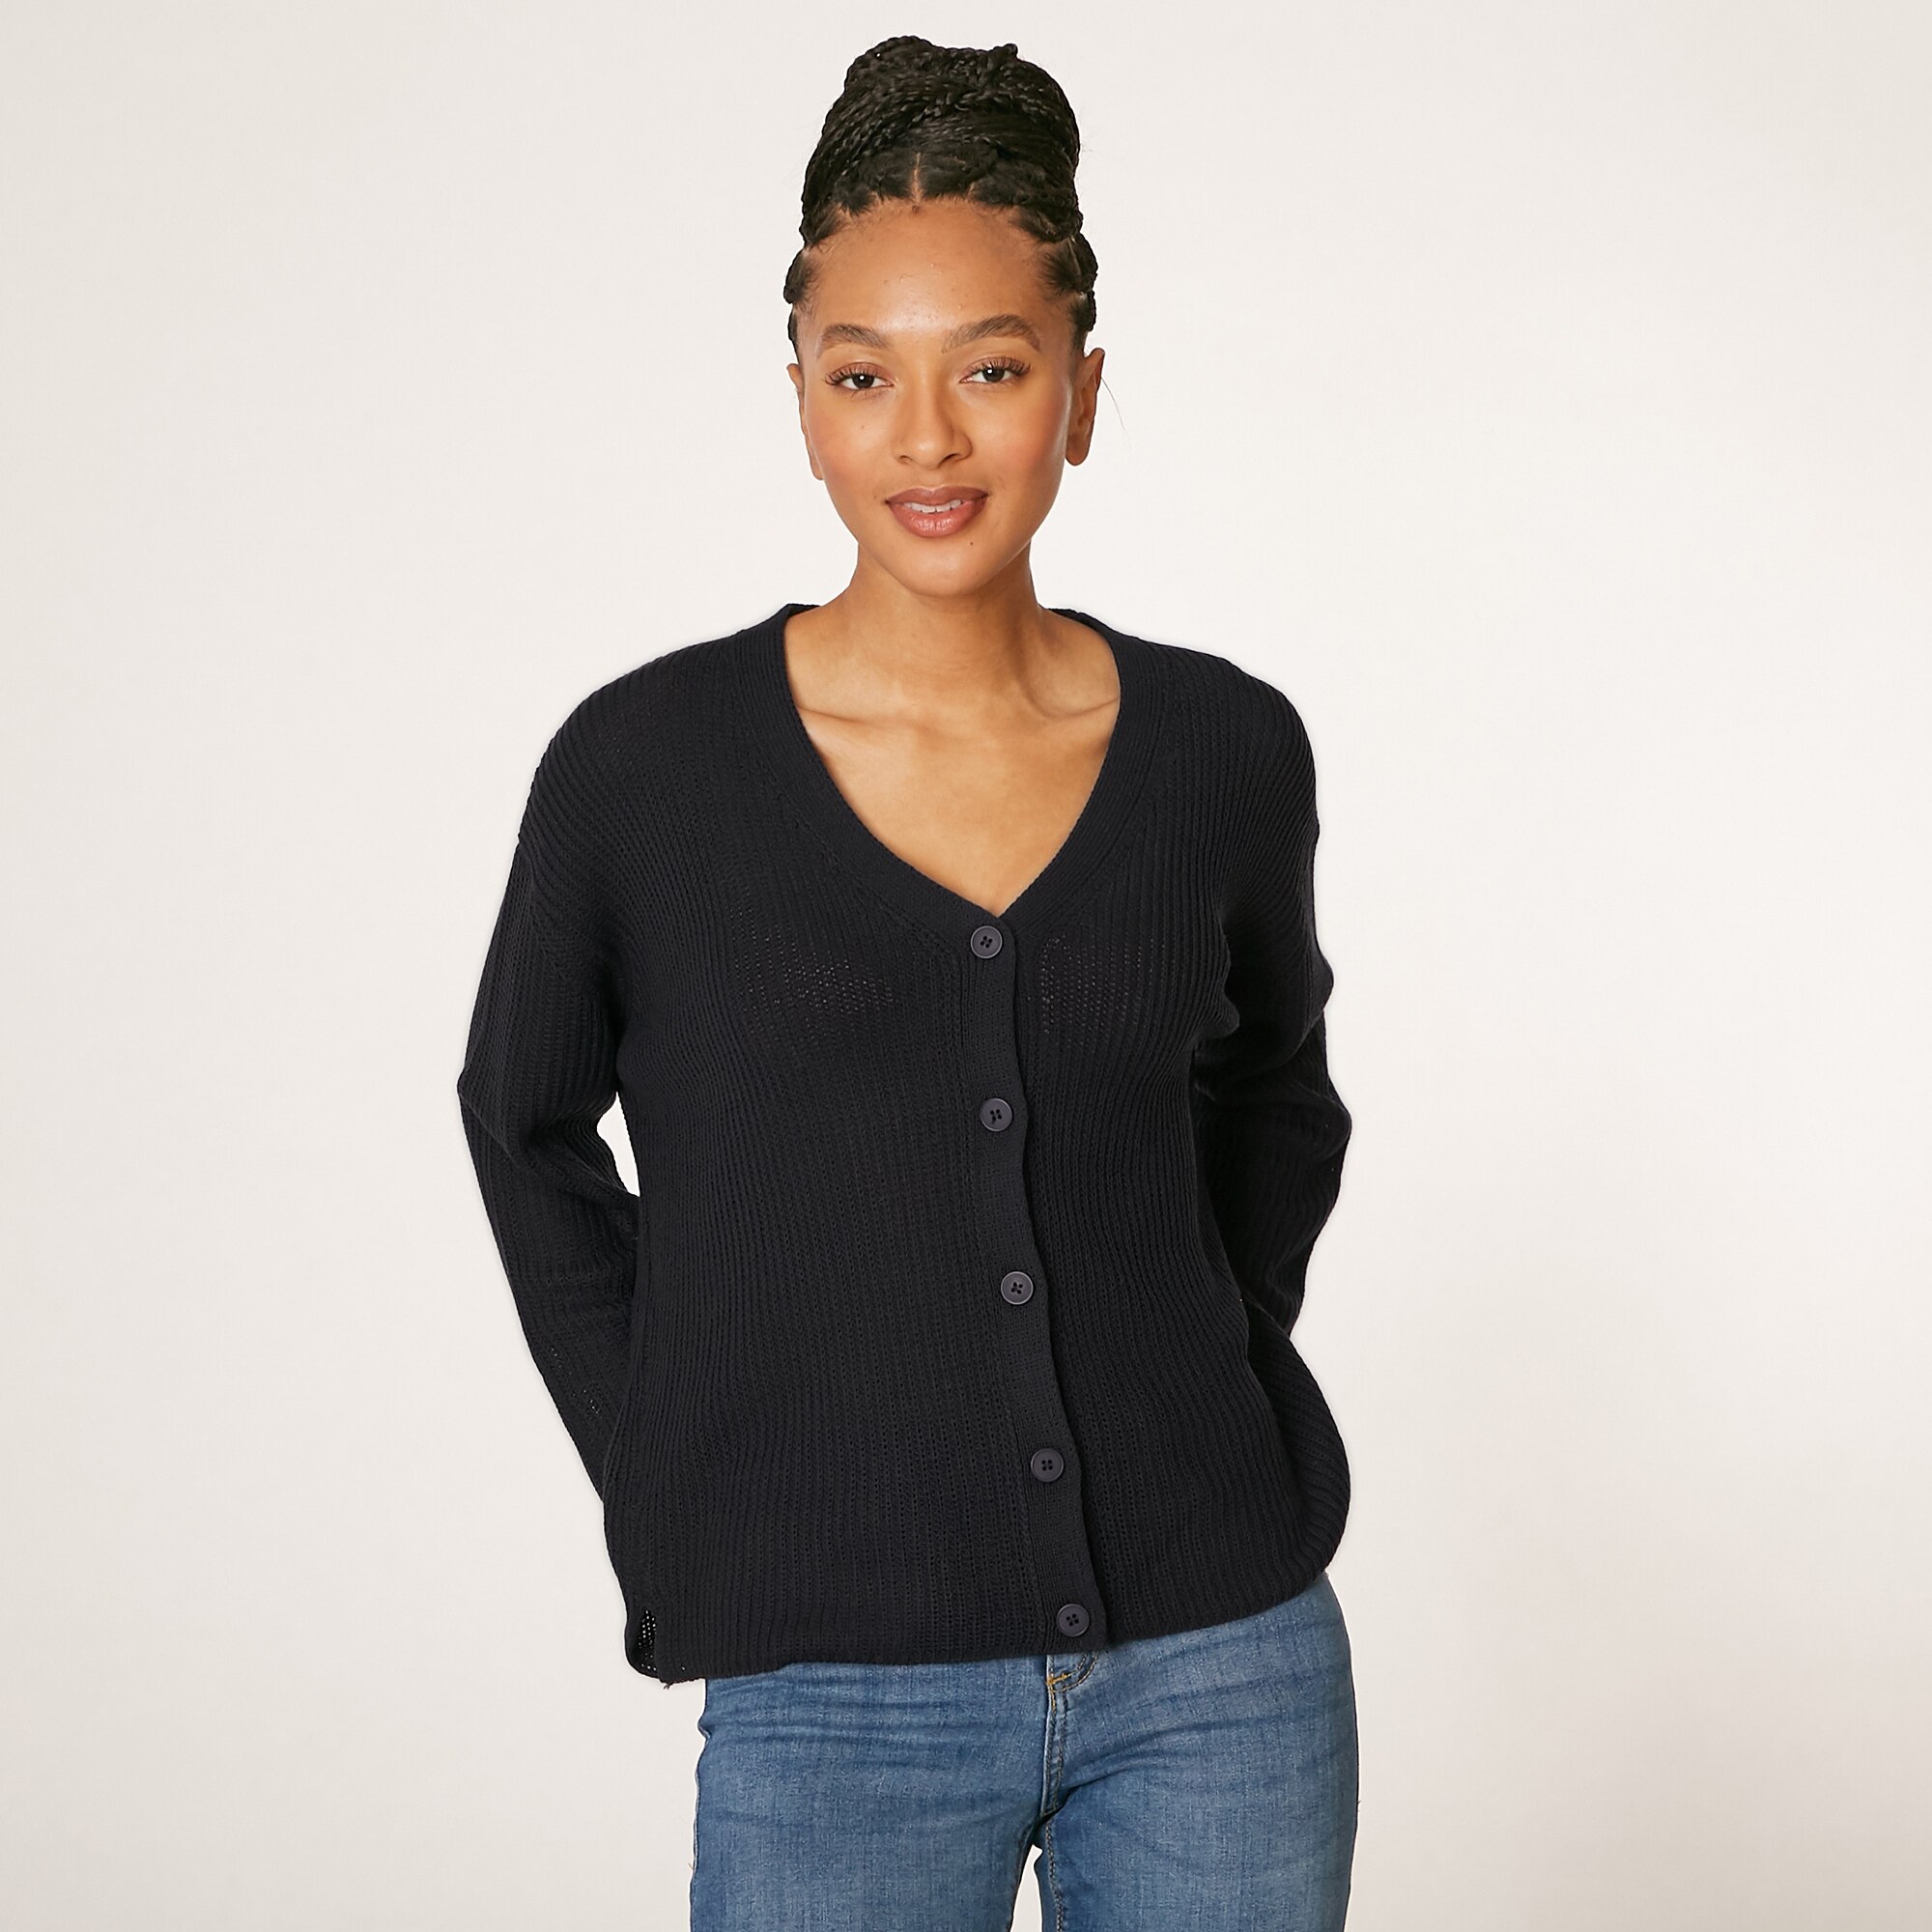 Clothing & Shoes - Tops - Sweaters & Cardigans - Cardigans - Brian